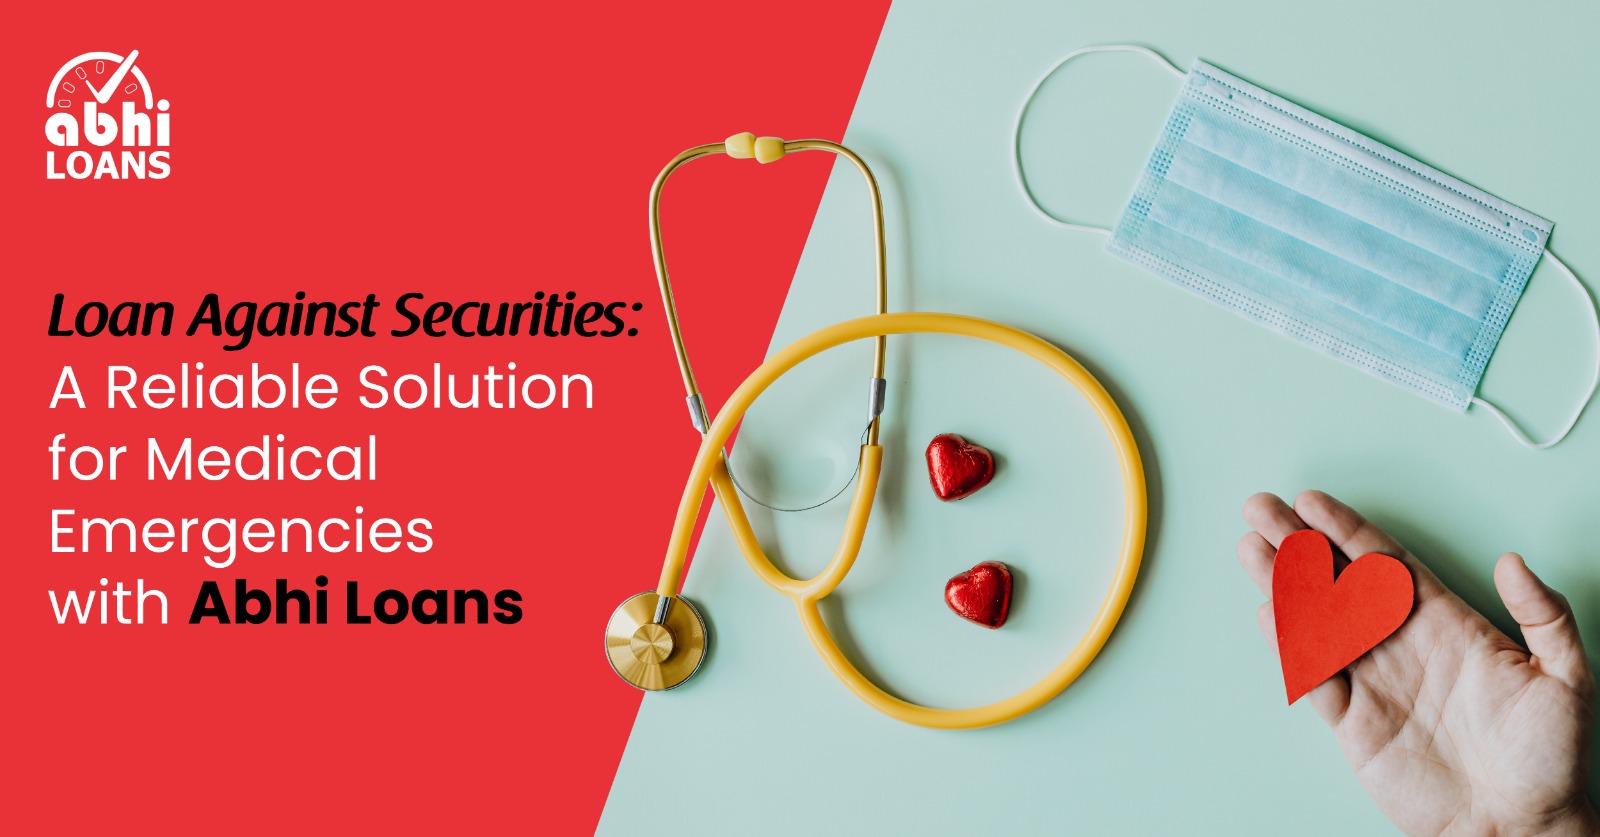 Loan Against Securities: A Reliable Solution for Medical Emergencies 